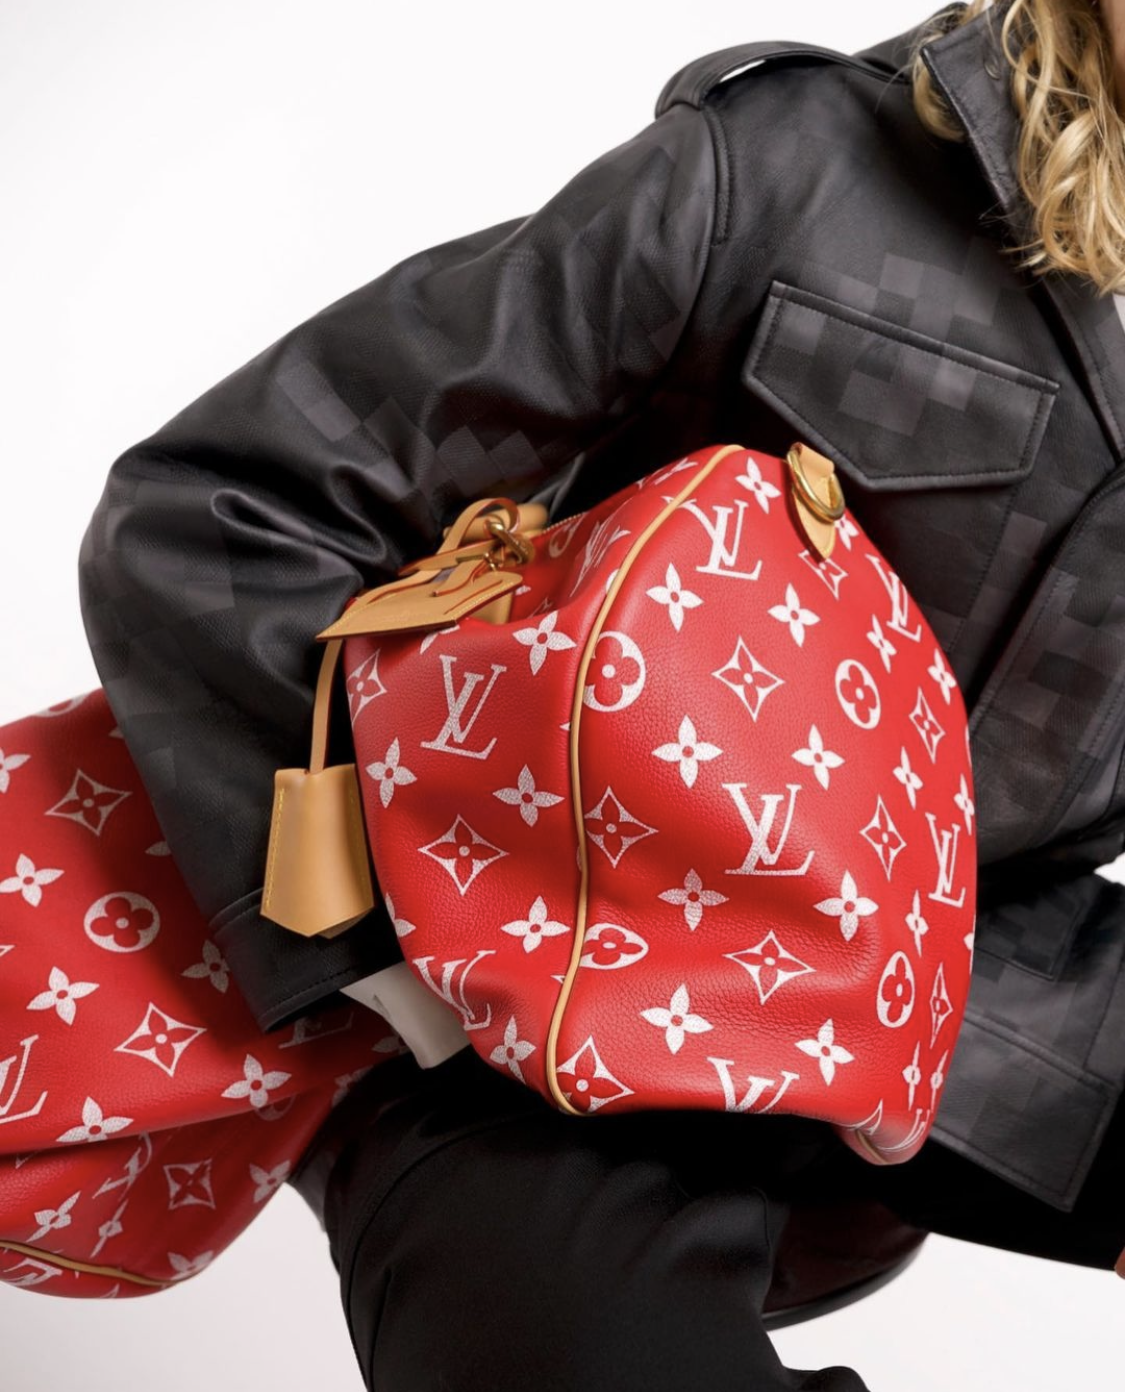 Louis Vuitton Just Released a Men's Version of Its Wildly Popular